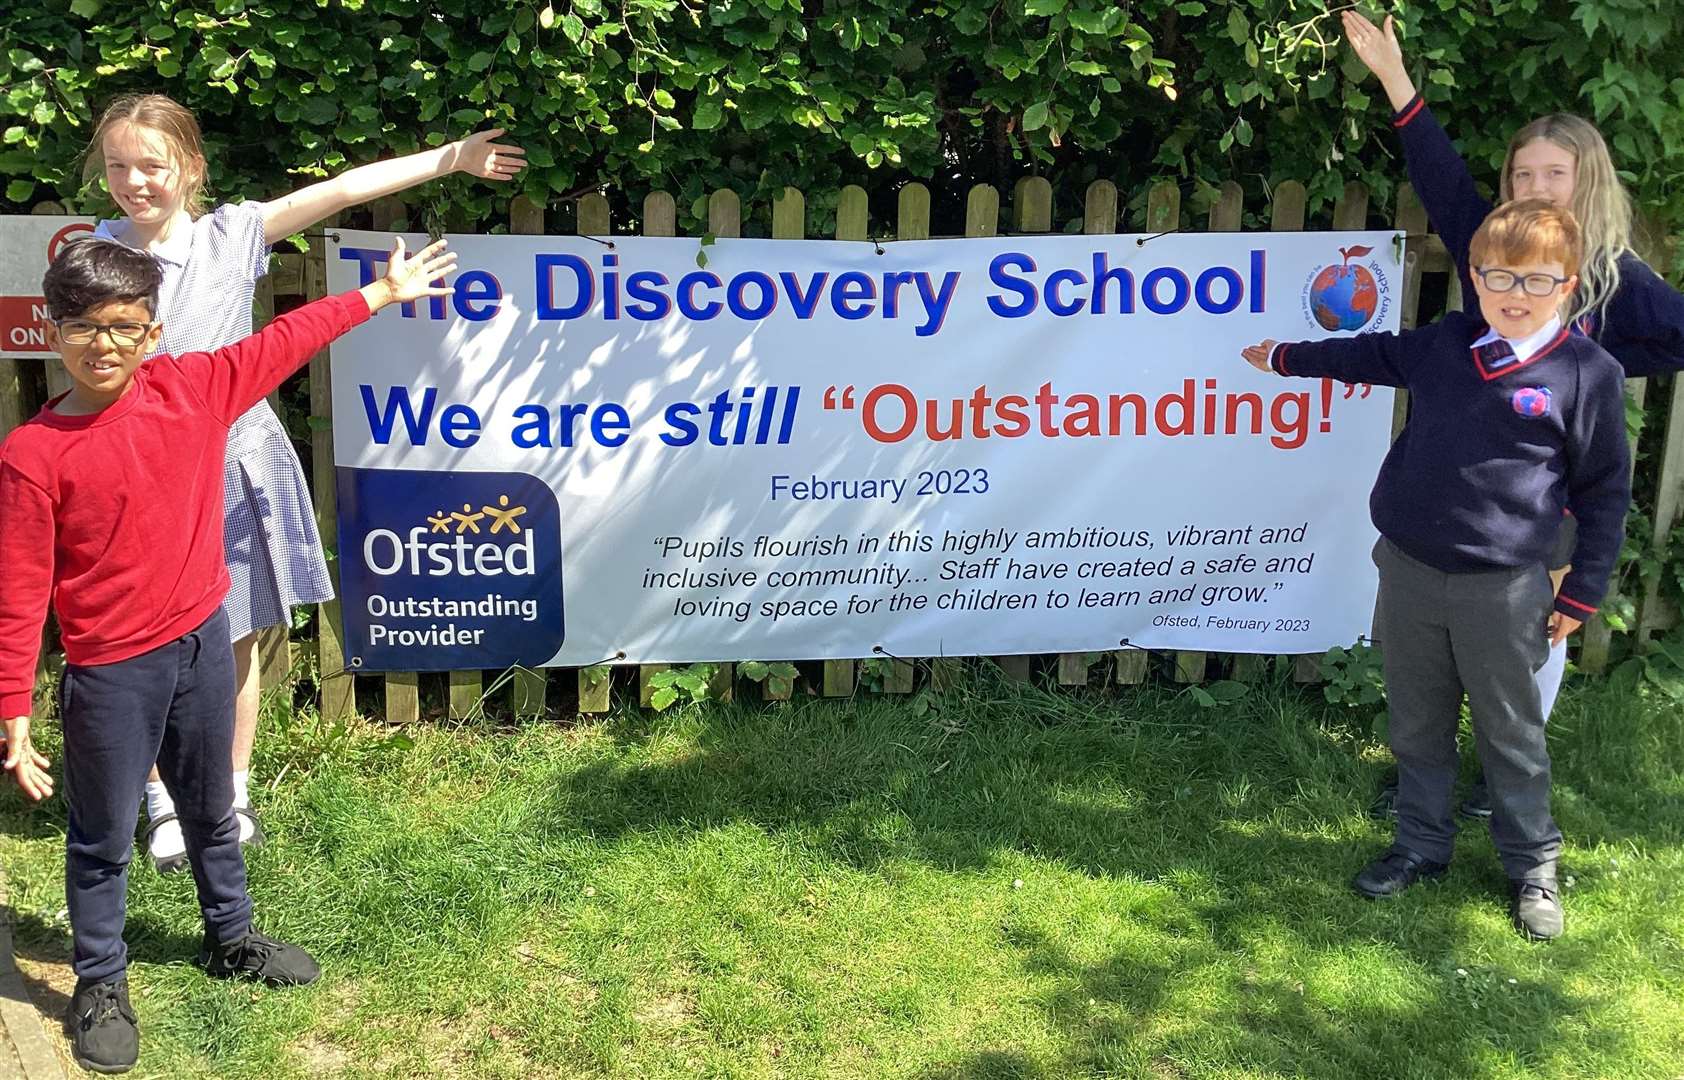 The Discovery School in Kings Hill, West Malling, has maintained its 'Outstanding' rating. Picture: The Discovery School